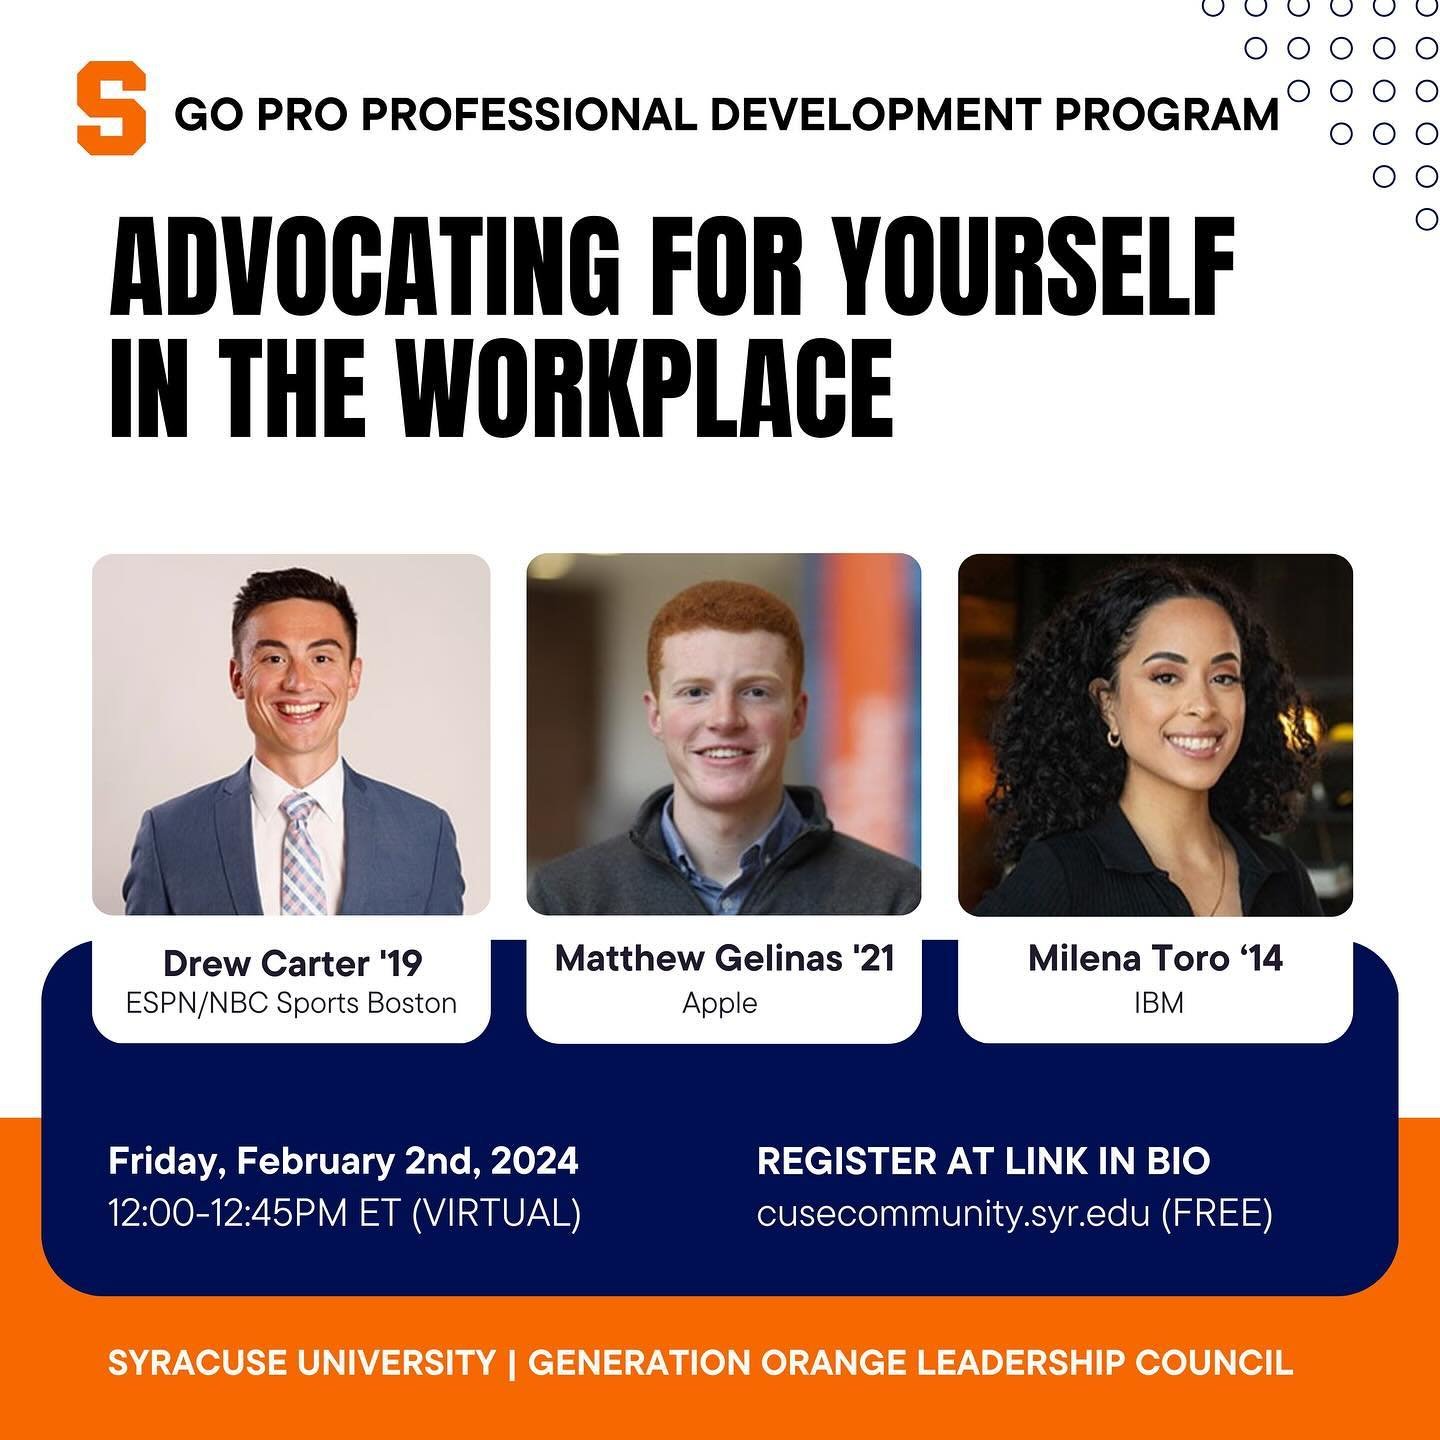 Tomorrow 2/2 join me and my fellow 'Cuse for a discussion panel about work-life balance and advocacy in the workplace 👩🏽&zwj;💻🍊

Thank you @syracuseu @newhousesu Generation Orange Leadership Council for having me. I'm looking fwd to this chat! 

